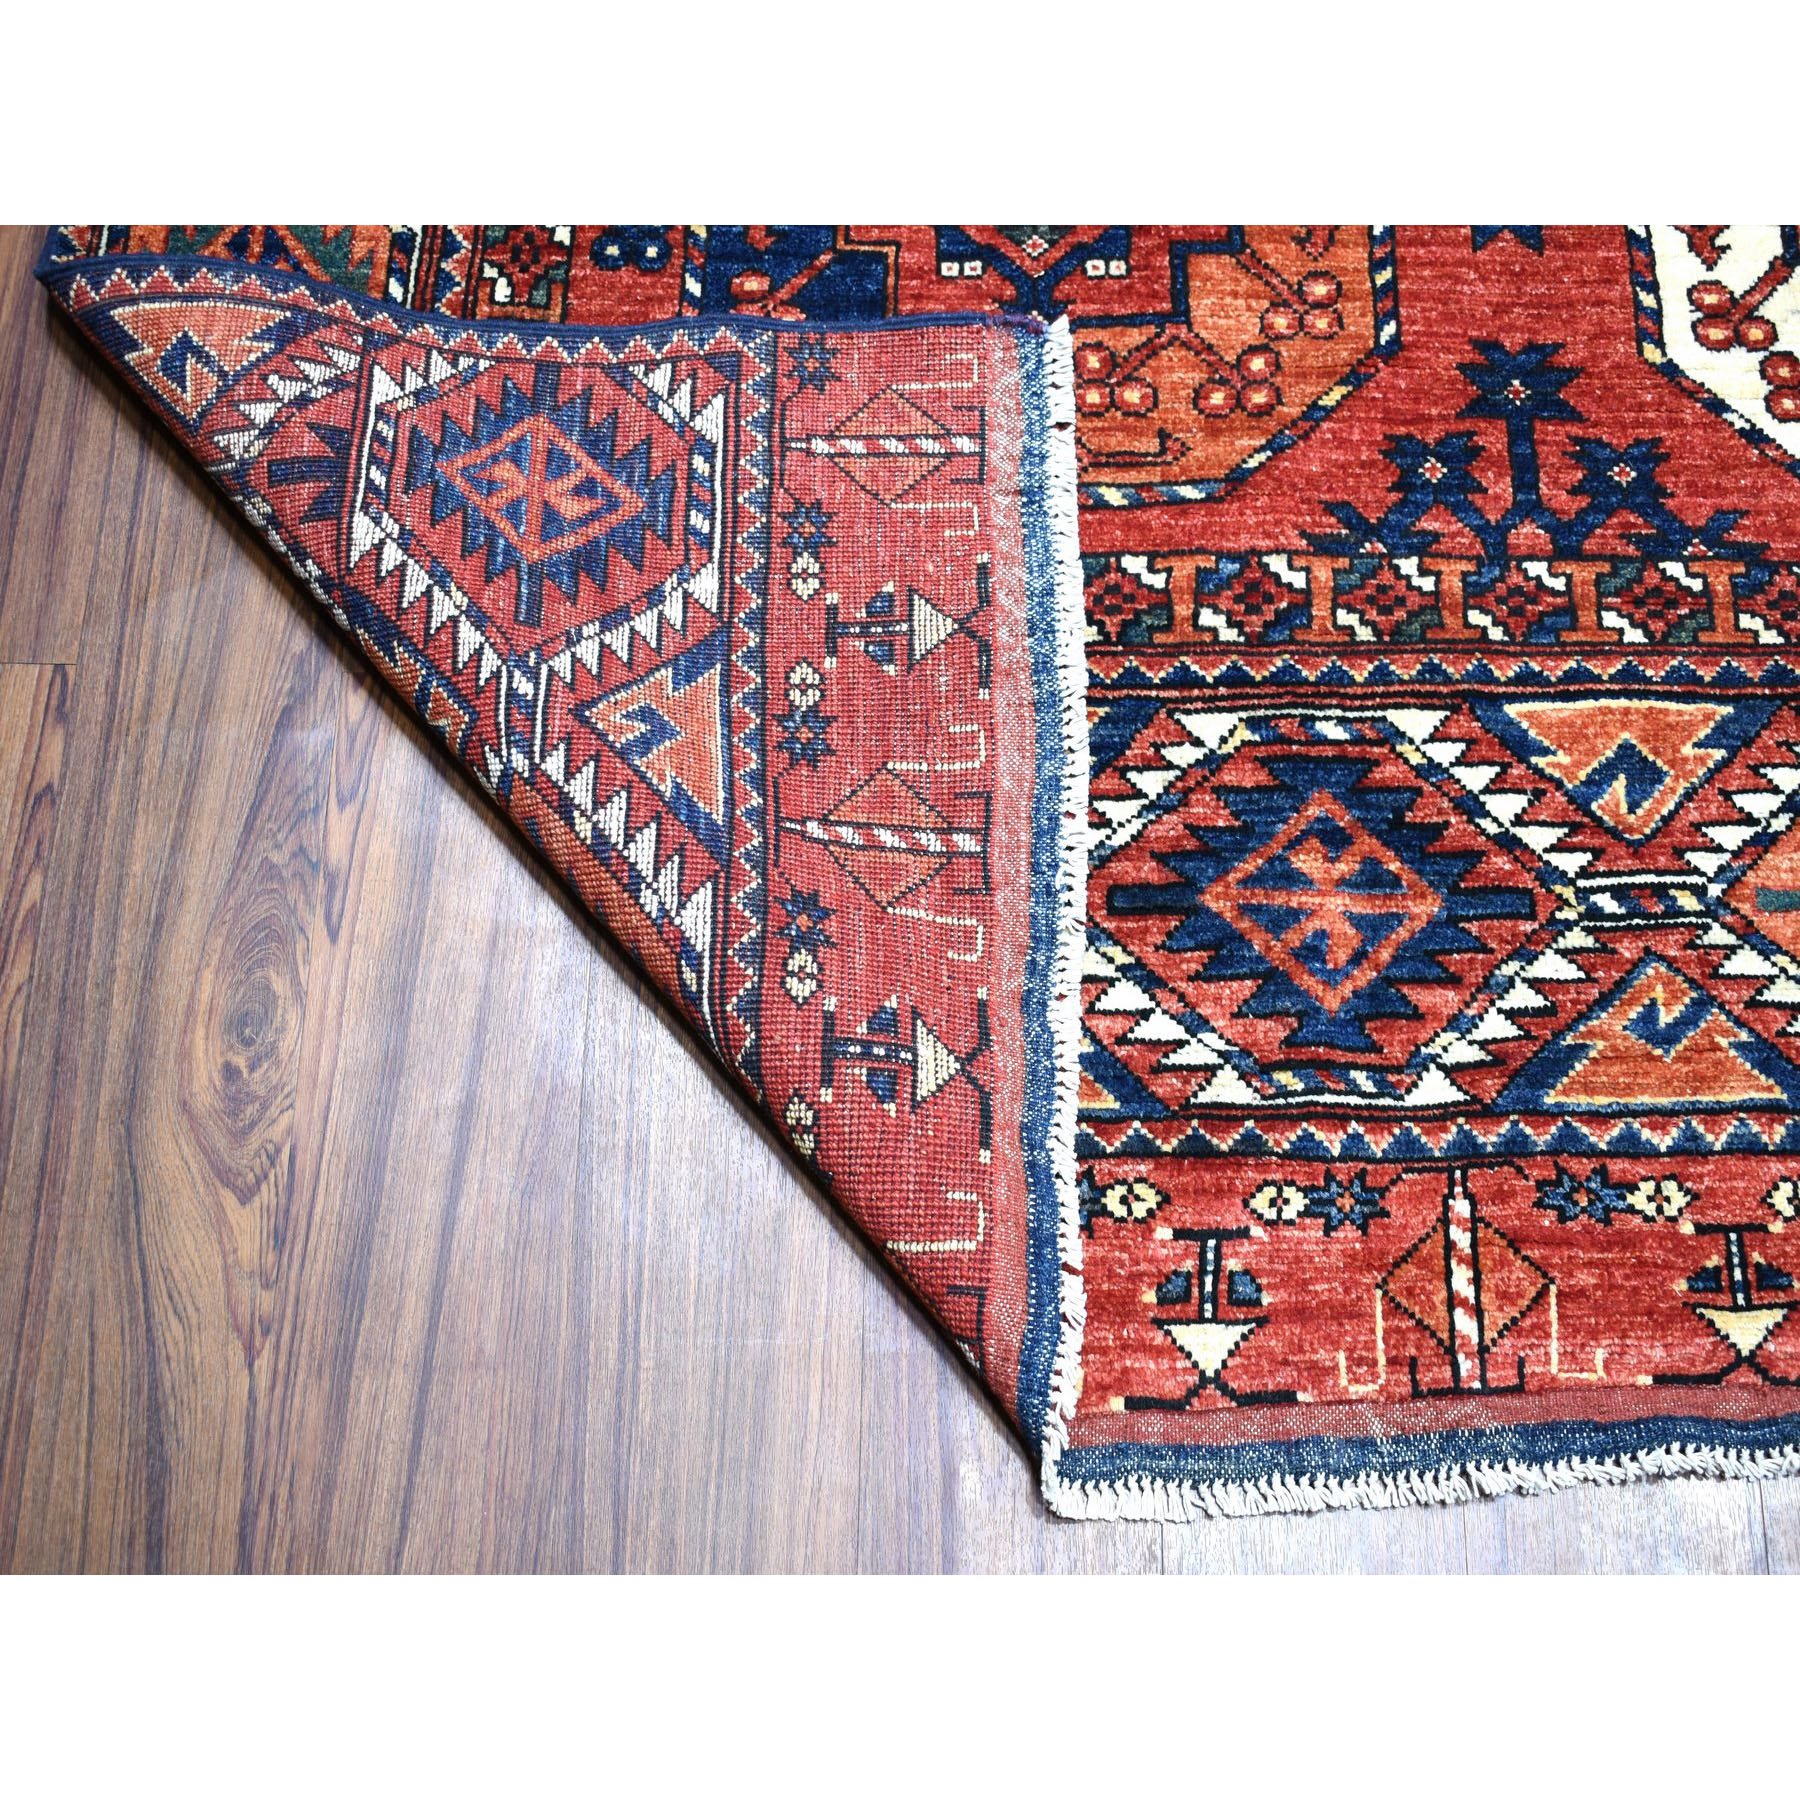 9-9 x13-4  Afghan Ersari With Elephant Feet Design Greens Natural Dyes Pure Wool Hand Knotted Oriental Rug 